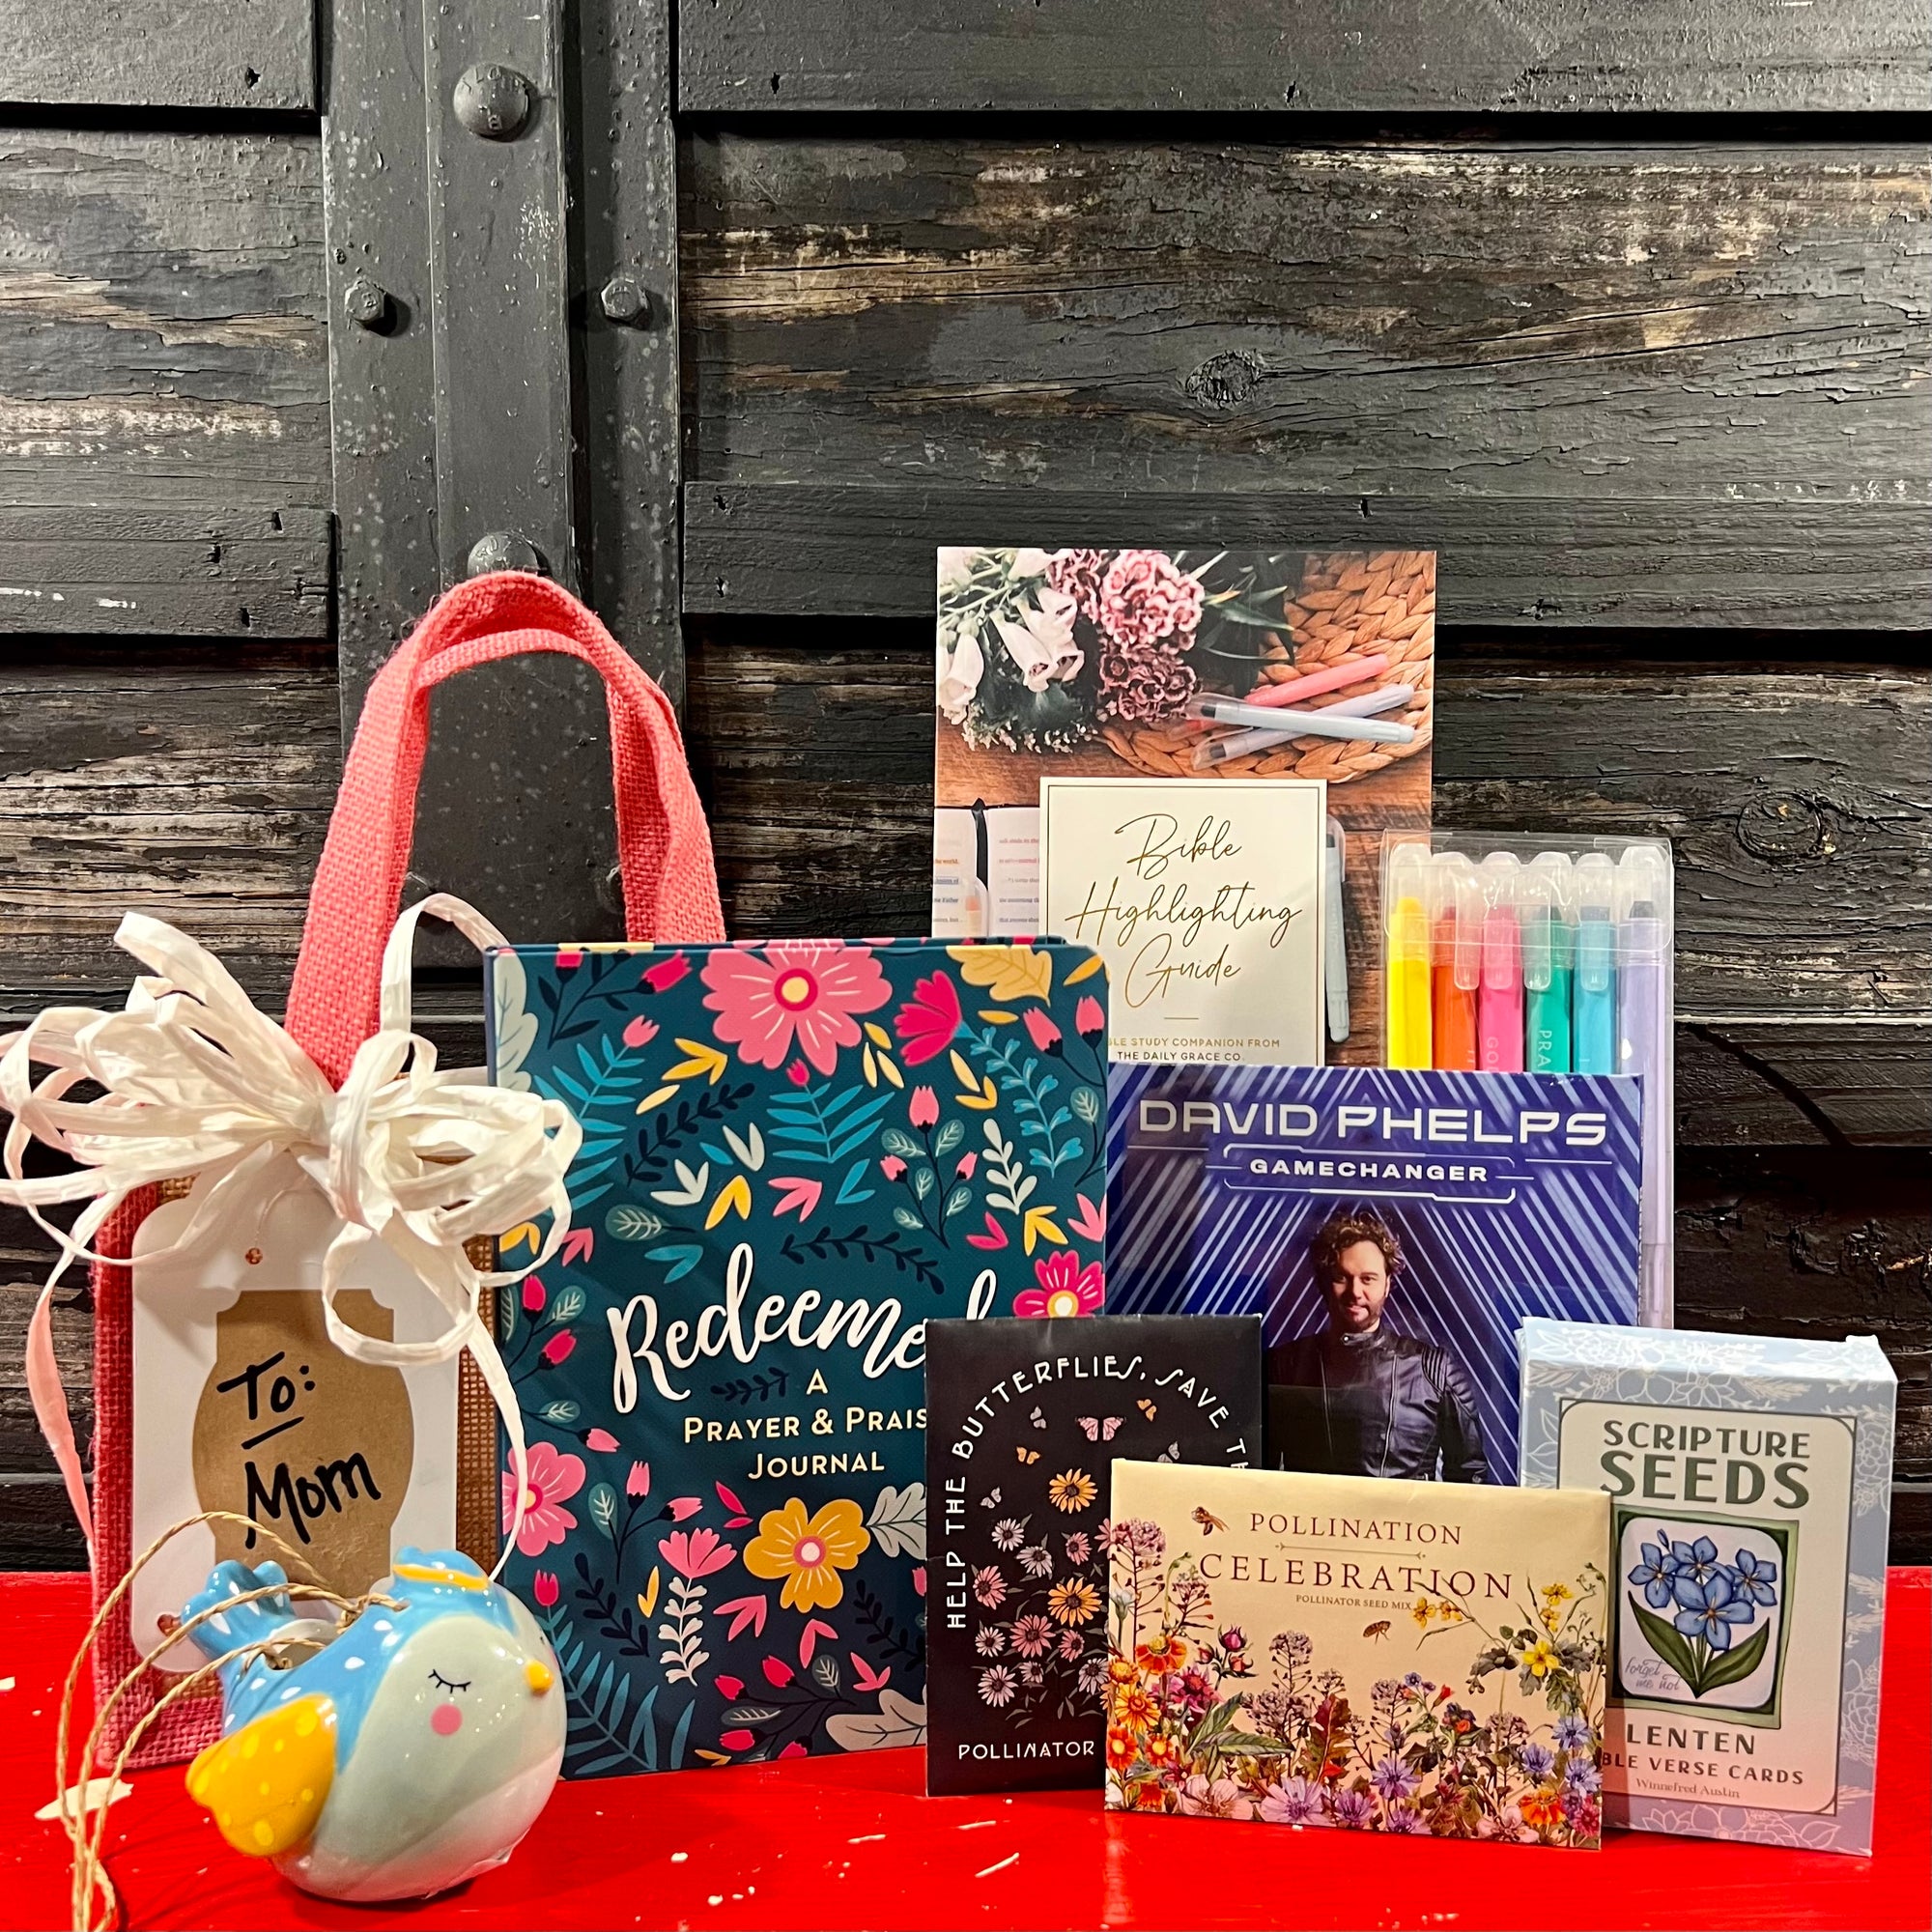 Mother's Day Gift Tote